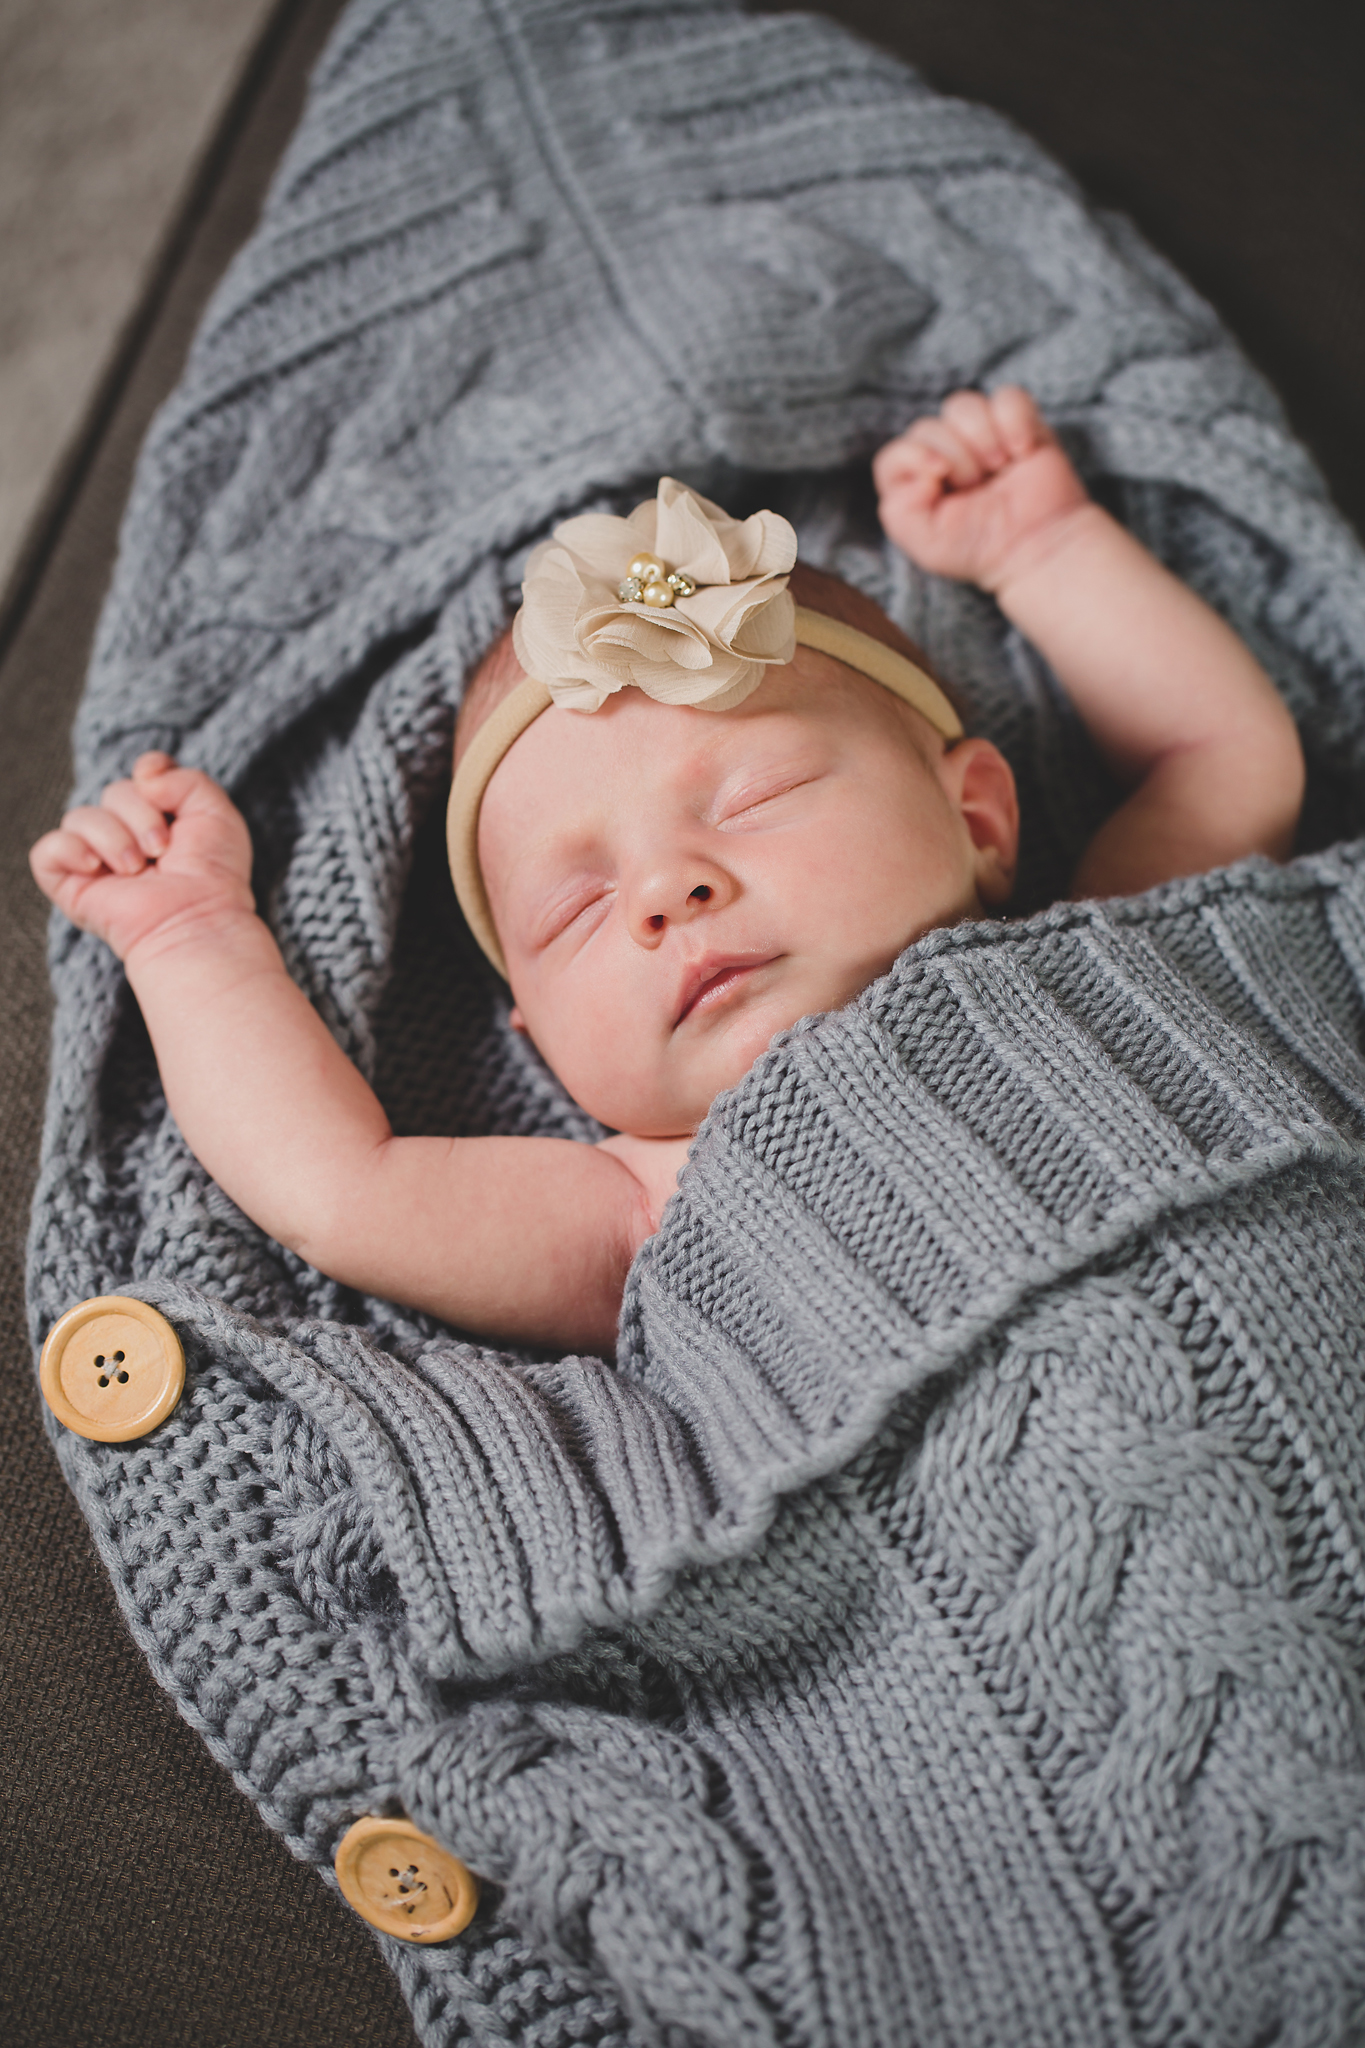 Baby Myla lifestyle newborn session at home with her parents and dog